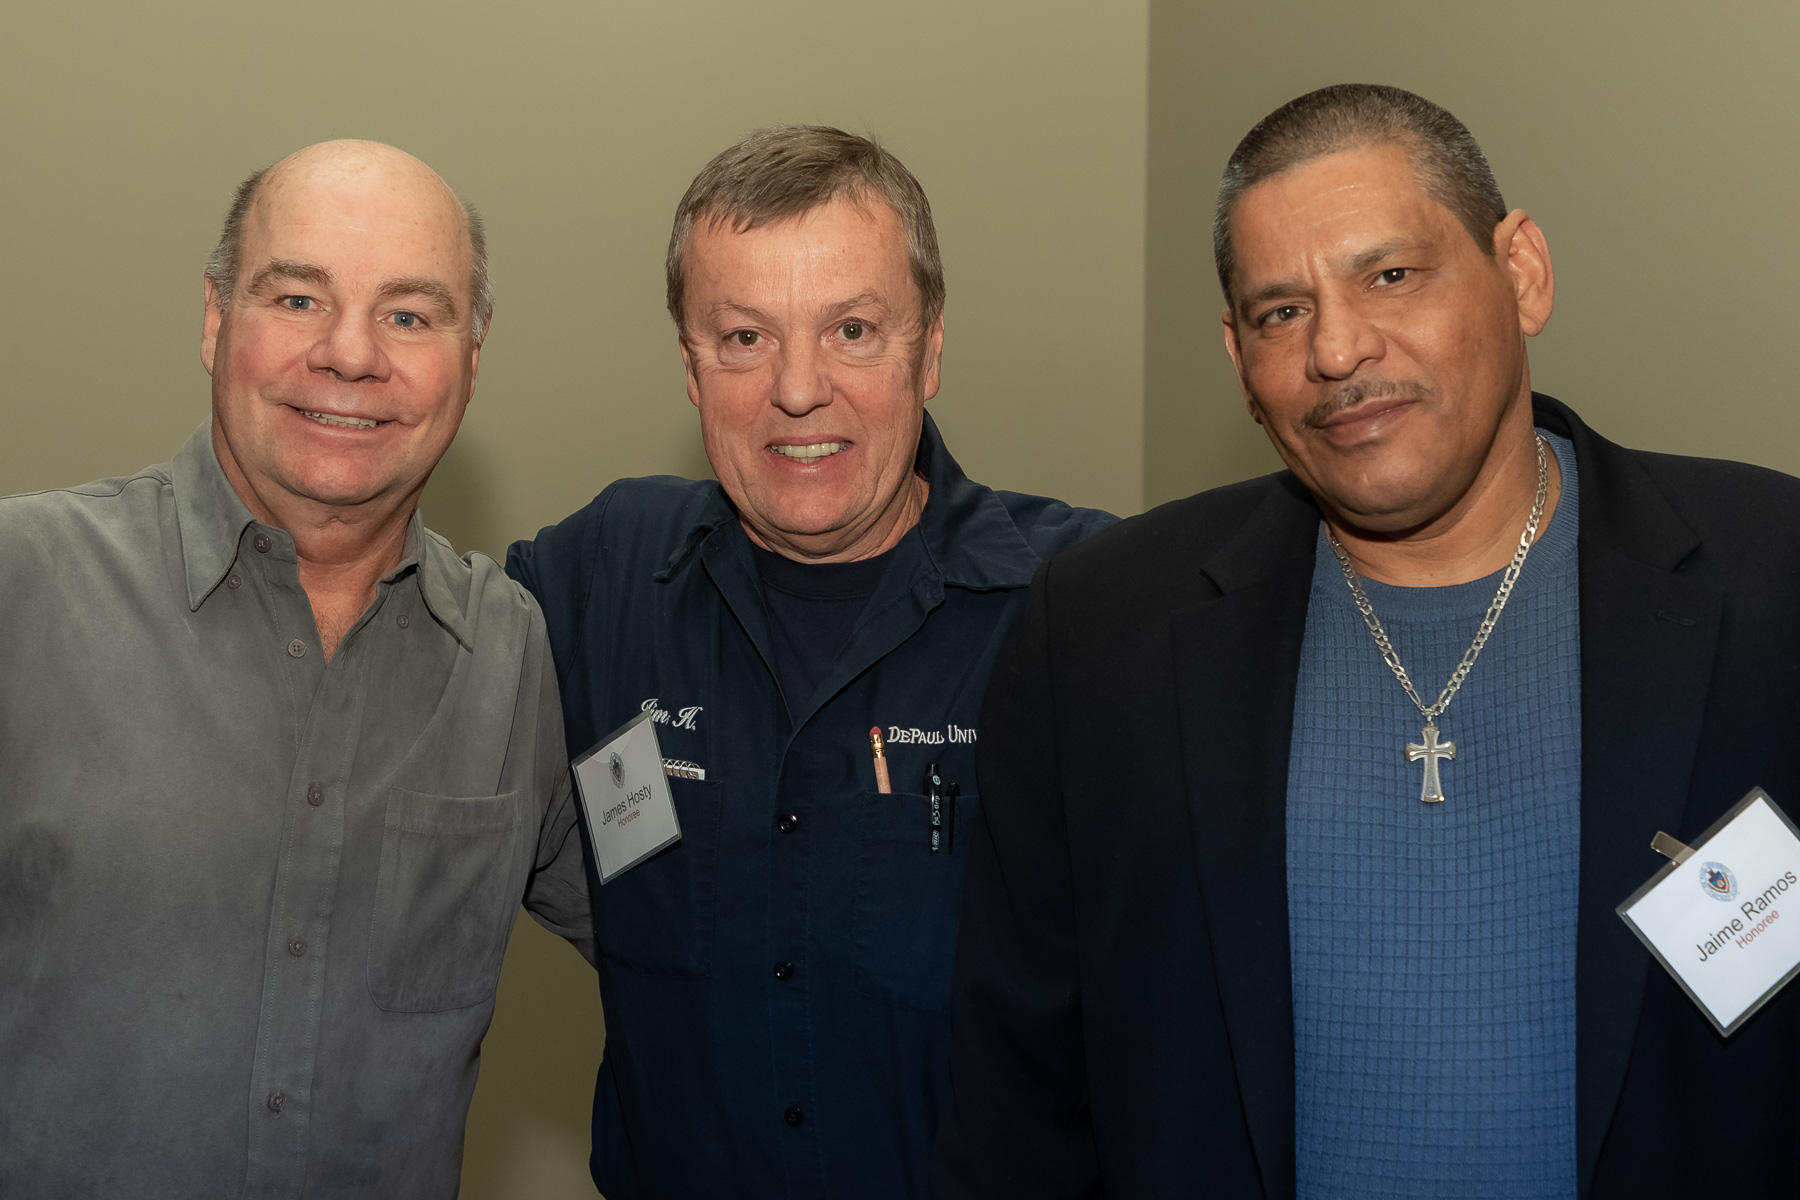 Left to right, Walter Rabenda, James Hosty, and Jaime Ramos, staff in Facility Operations, as DePaul University faculty and staff members are honored for their 25 years of service during a luncheon, Tuesday, Nov. 13, 2018, at the Lincoln Park Student Center. The honorees were recognized by A. Gabriel Esteban, Ph.D., president of DePaul, and will have their names added to plaques located on the Loop and Lincoln Park Campuses. (DePaul University/Jeff Carrion)